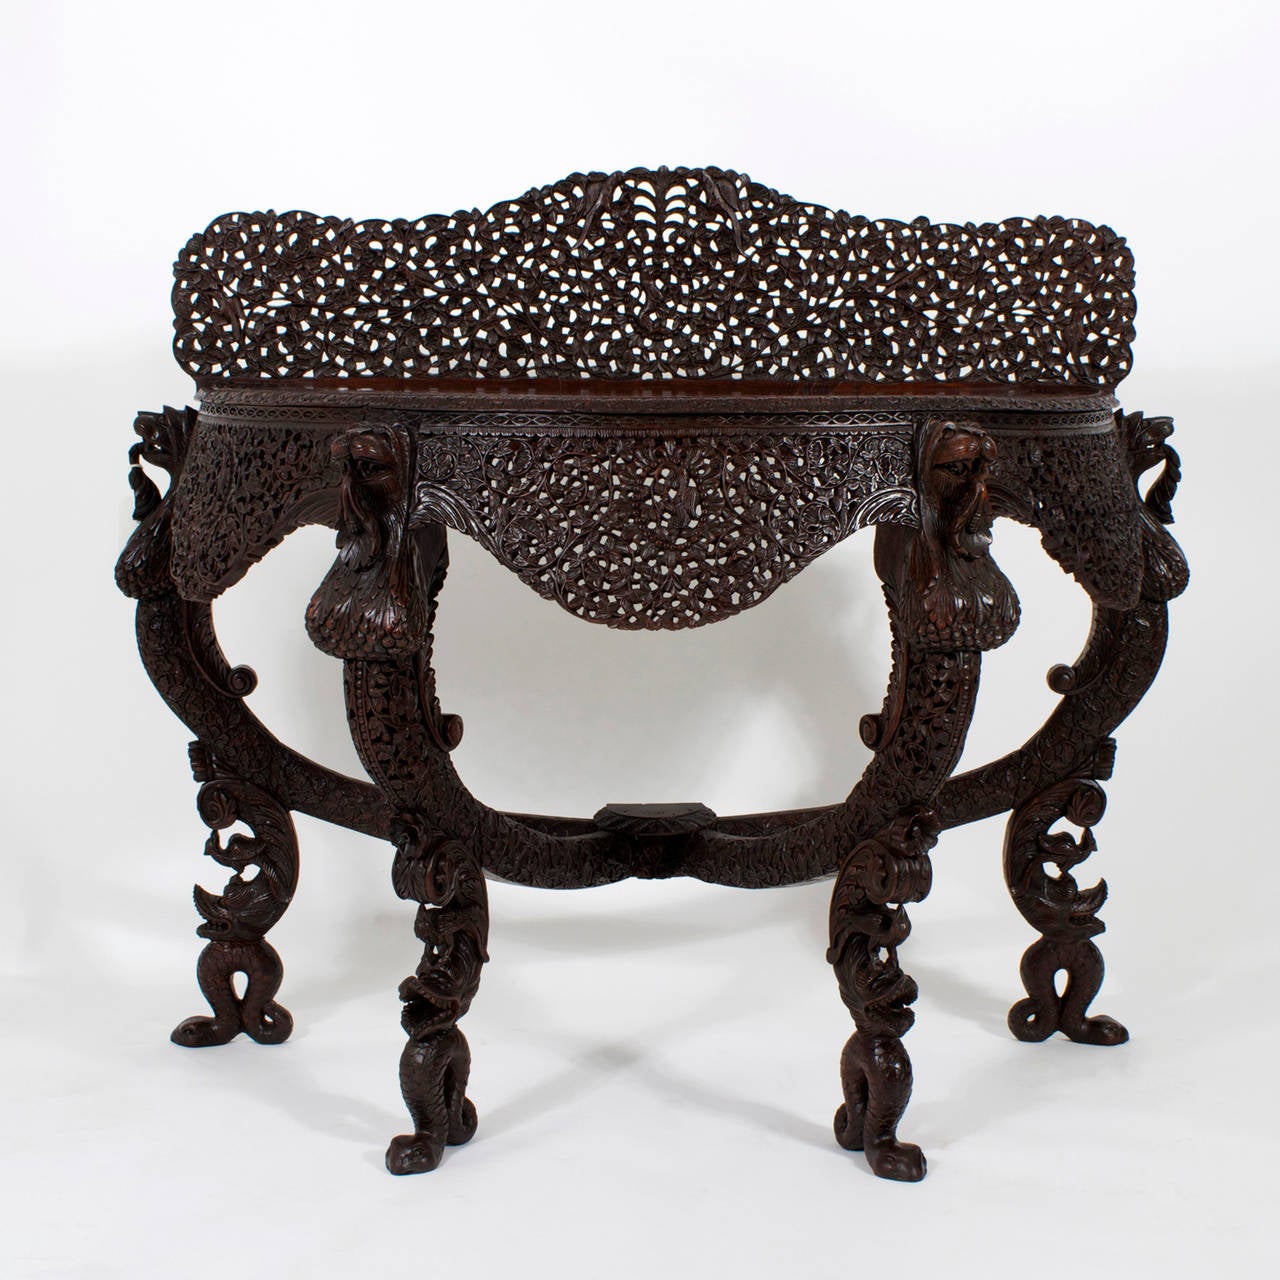 A 19th century Anglo-Indian demilune console table, in Bombay blackwood with carved legs depicting mythological serpents and bowed stretchers connecting to a center pad. Carved filigree skirts and back splash all done in an impressive bold